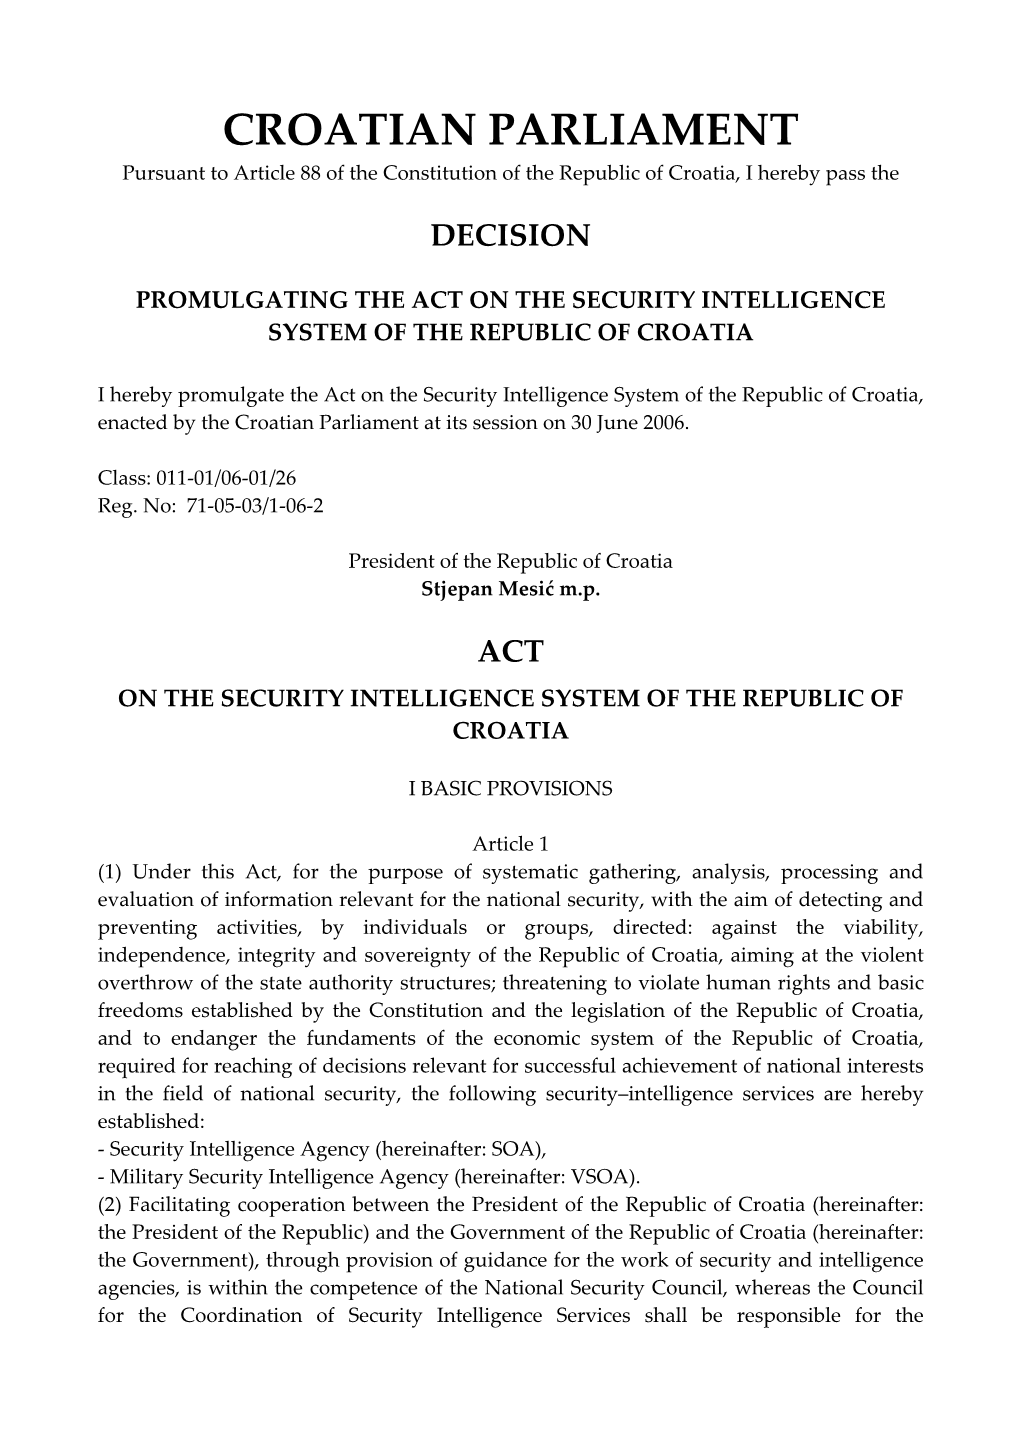 Act on the Security Intelligence System of the Republic of Croatia